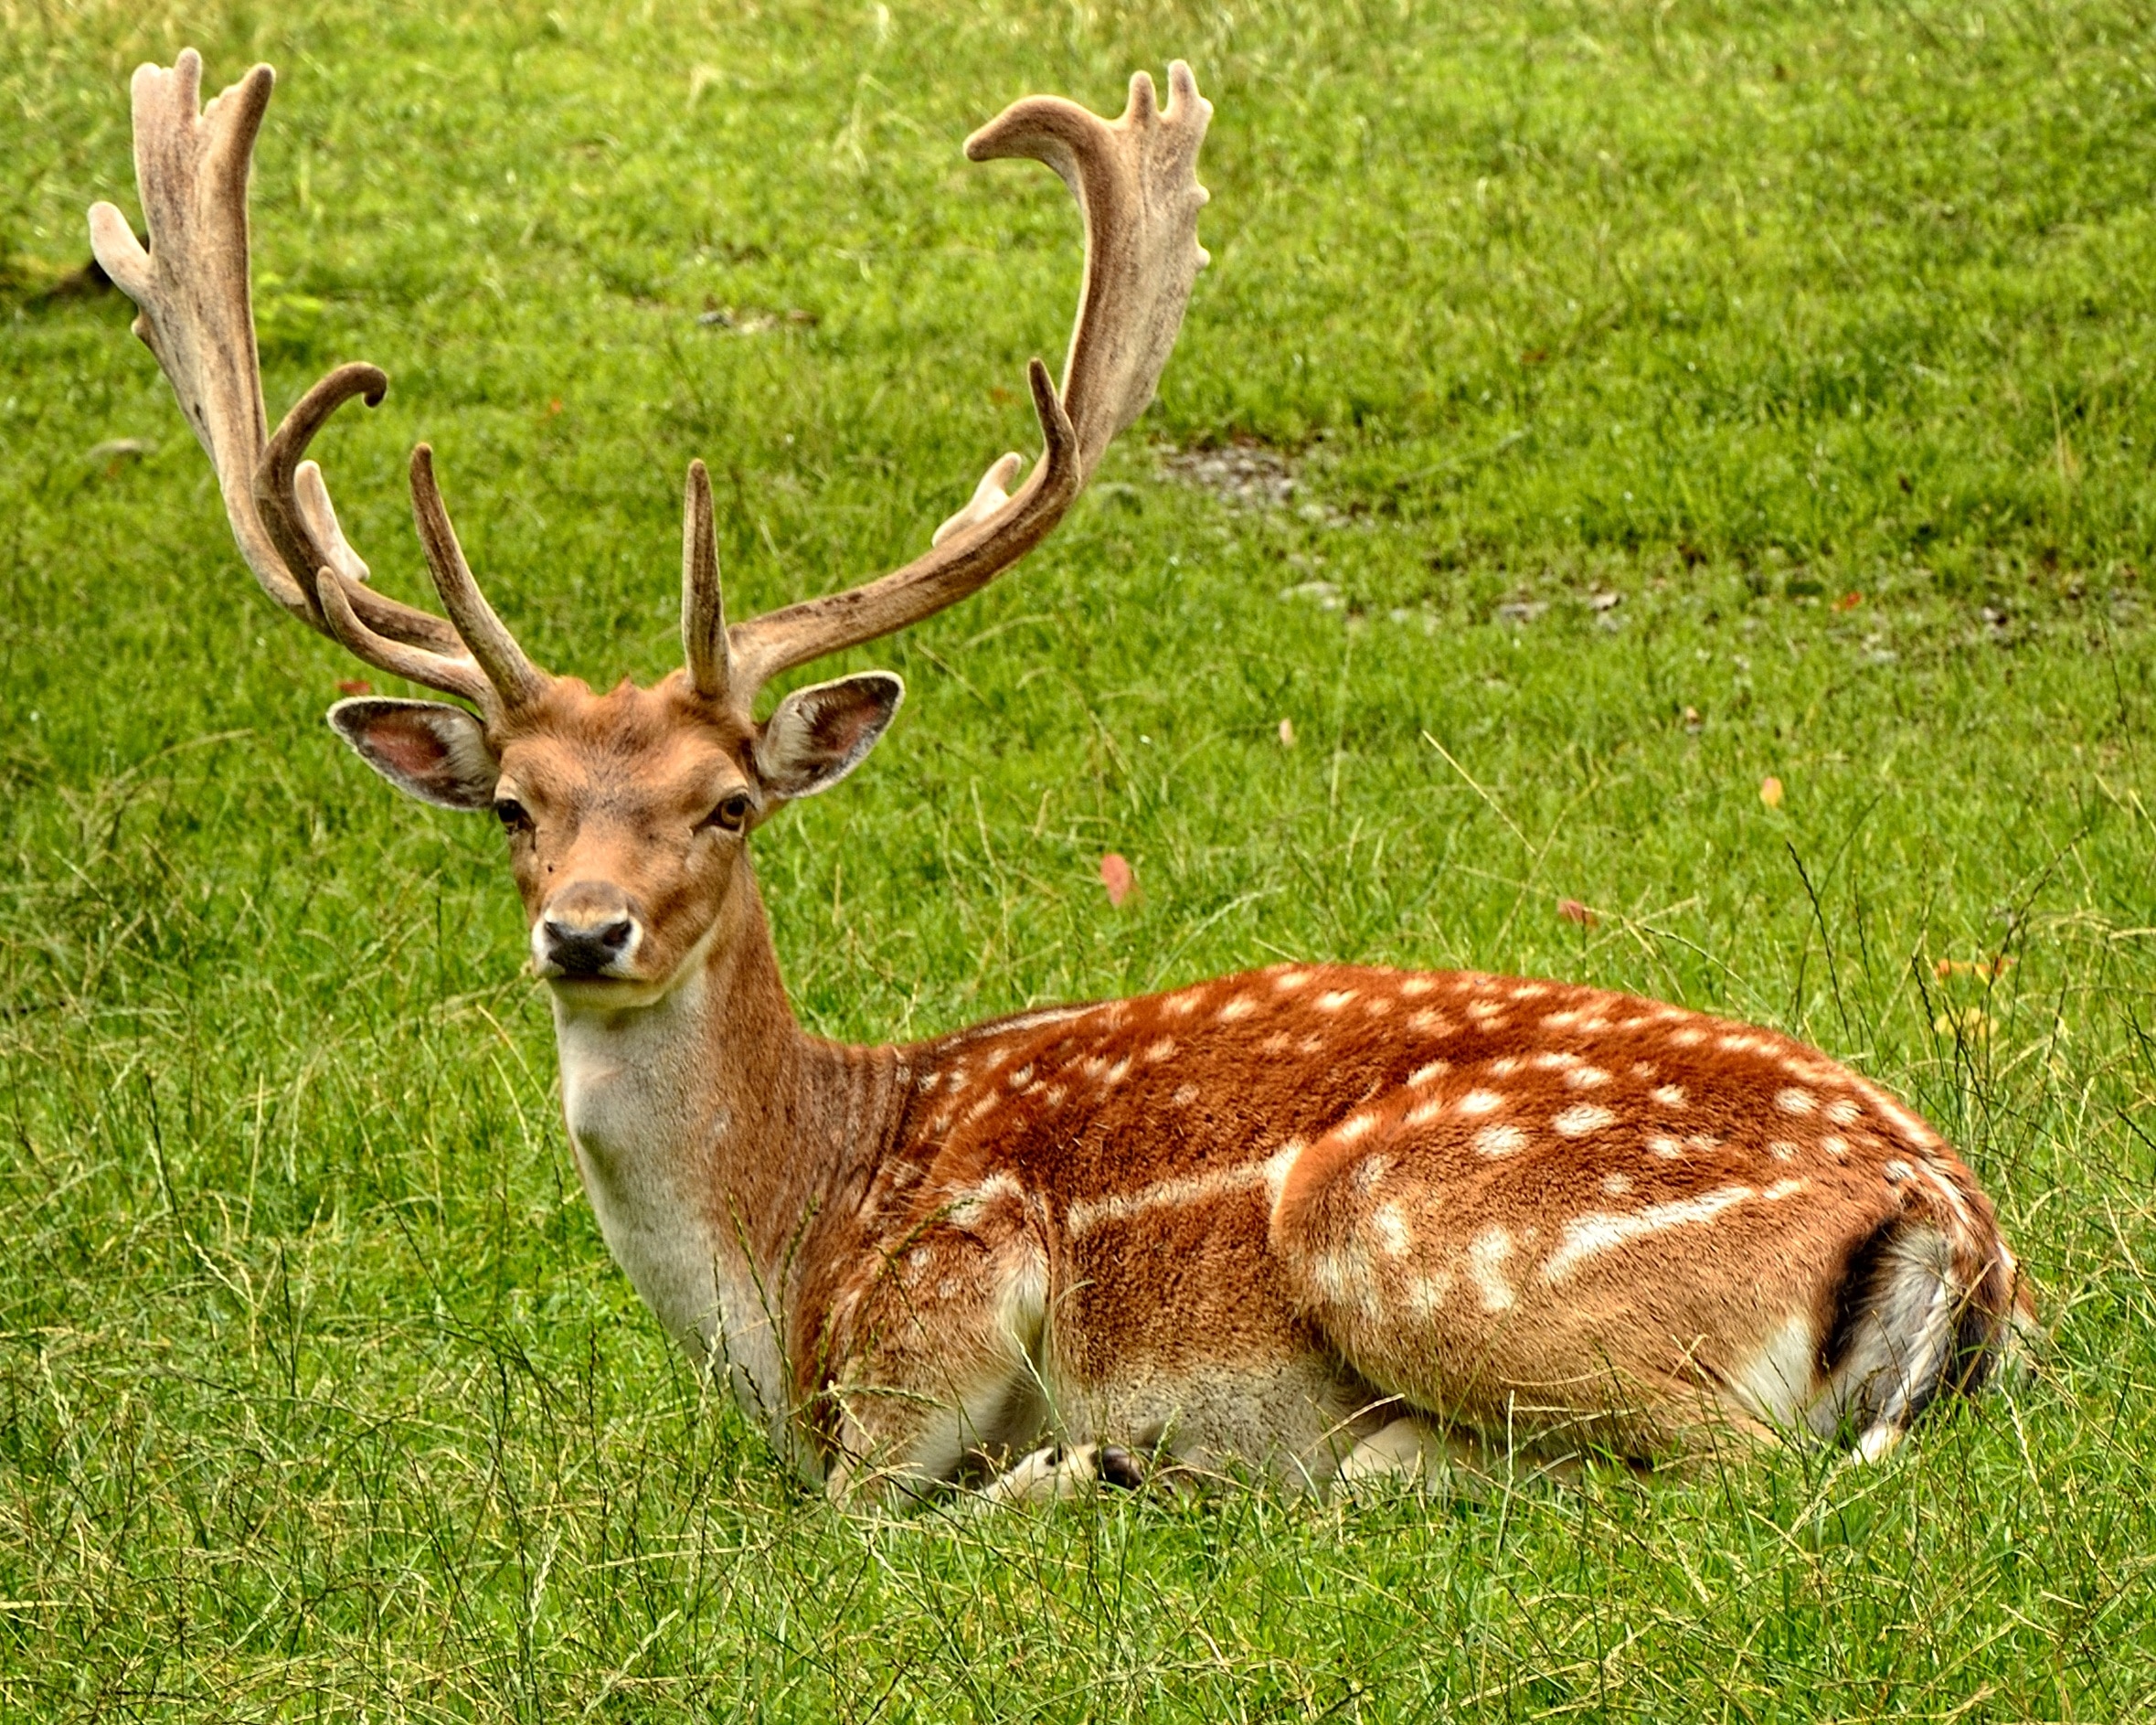 brown deer lying on a green grass field during daytime